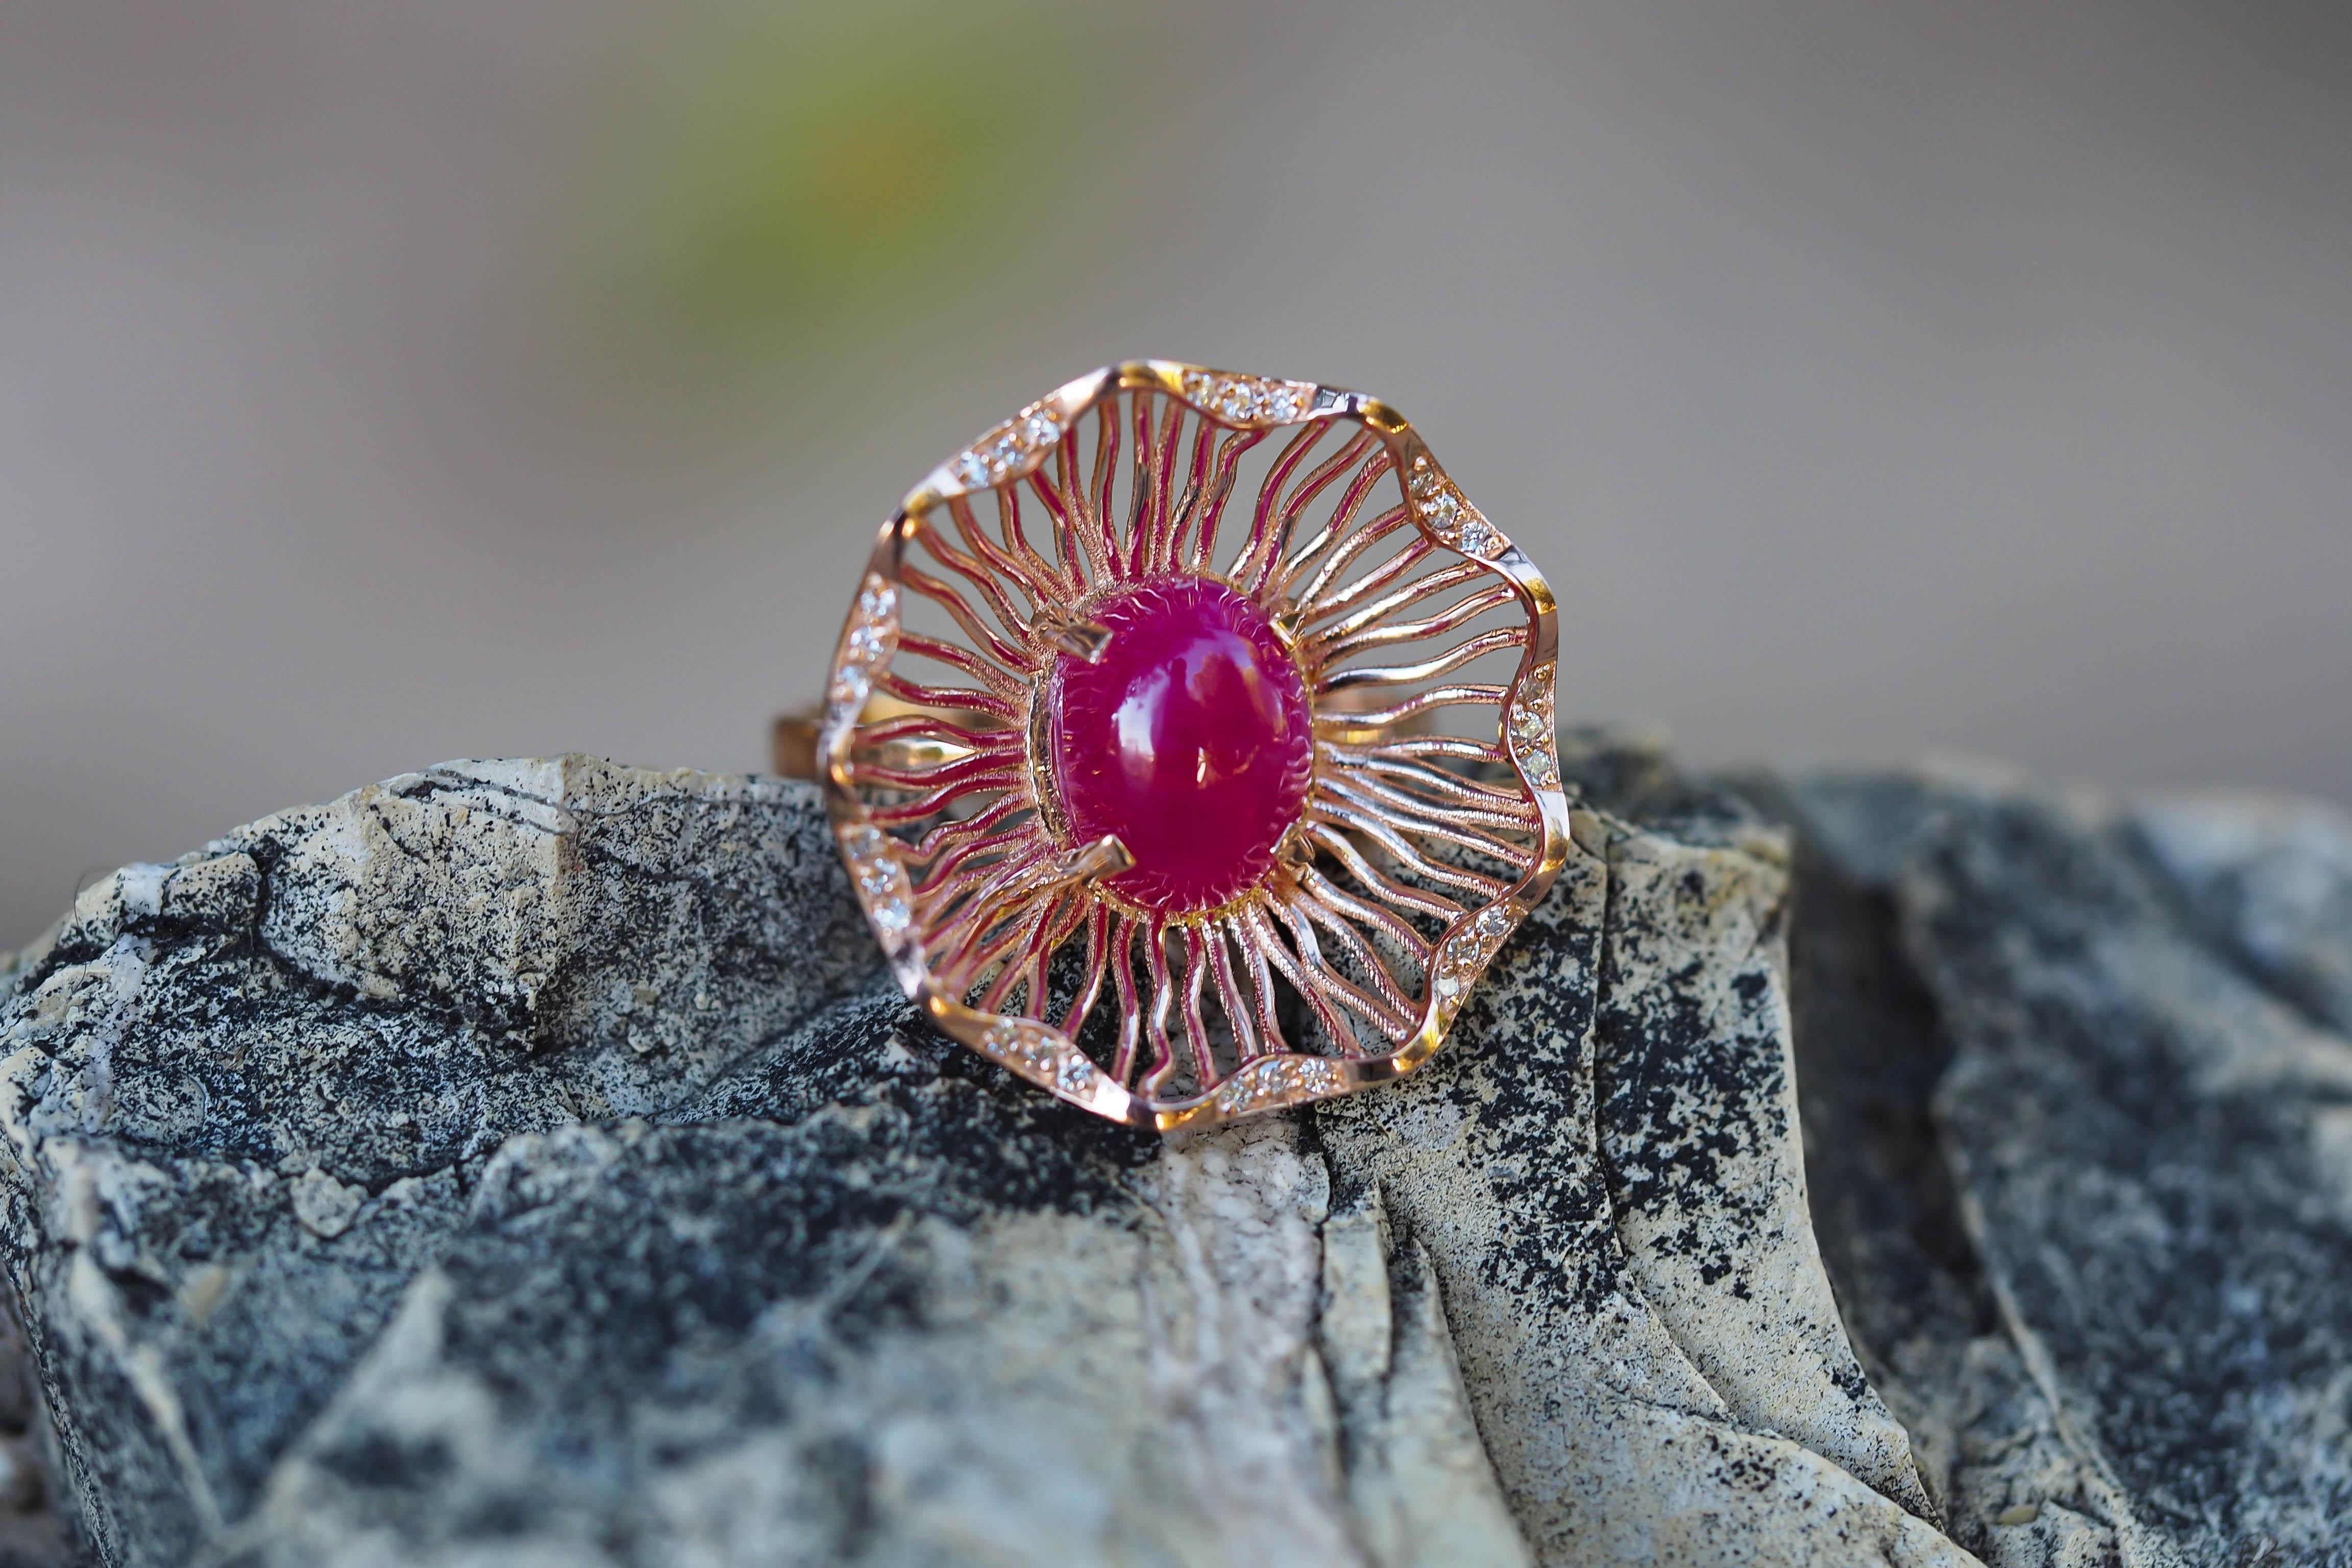 For Sale:  14k Gold Ring with Ruby and Diamonds, Vintage Inspired Ring with Ruby 11